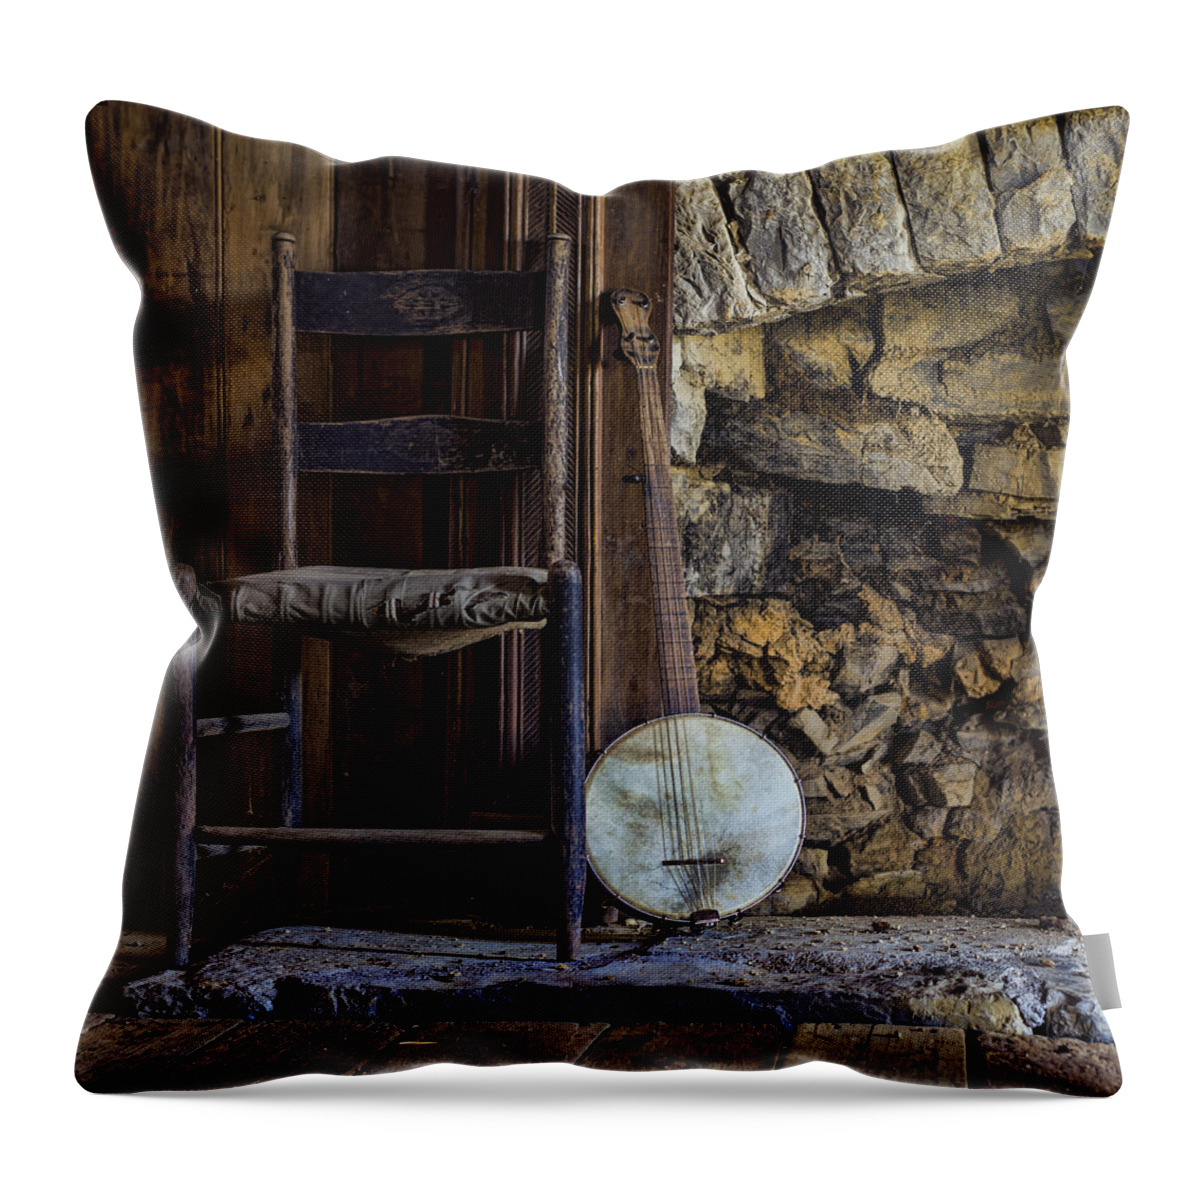 Banjo Throw Pillow featuring the photograph Old Banjo by Heather Applegate